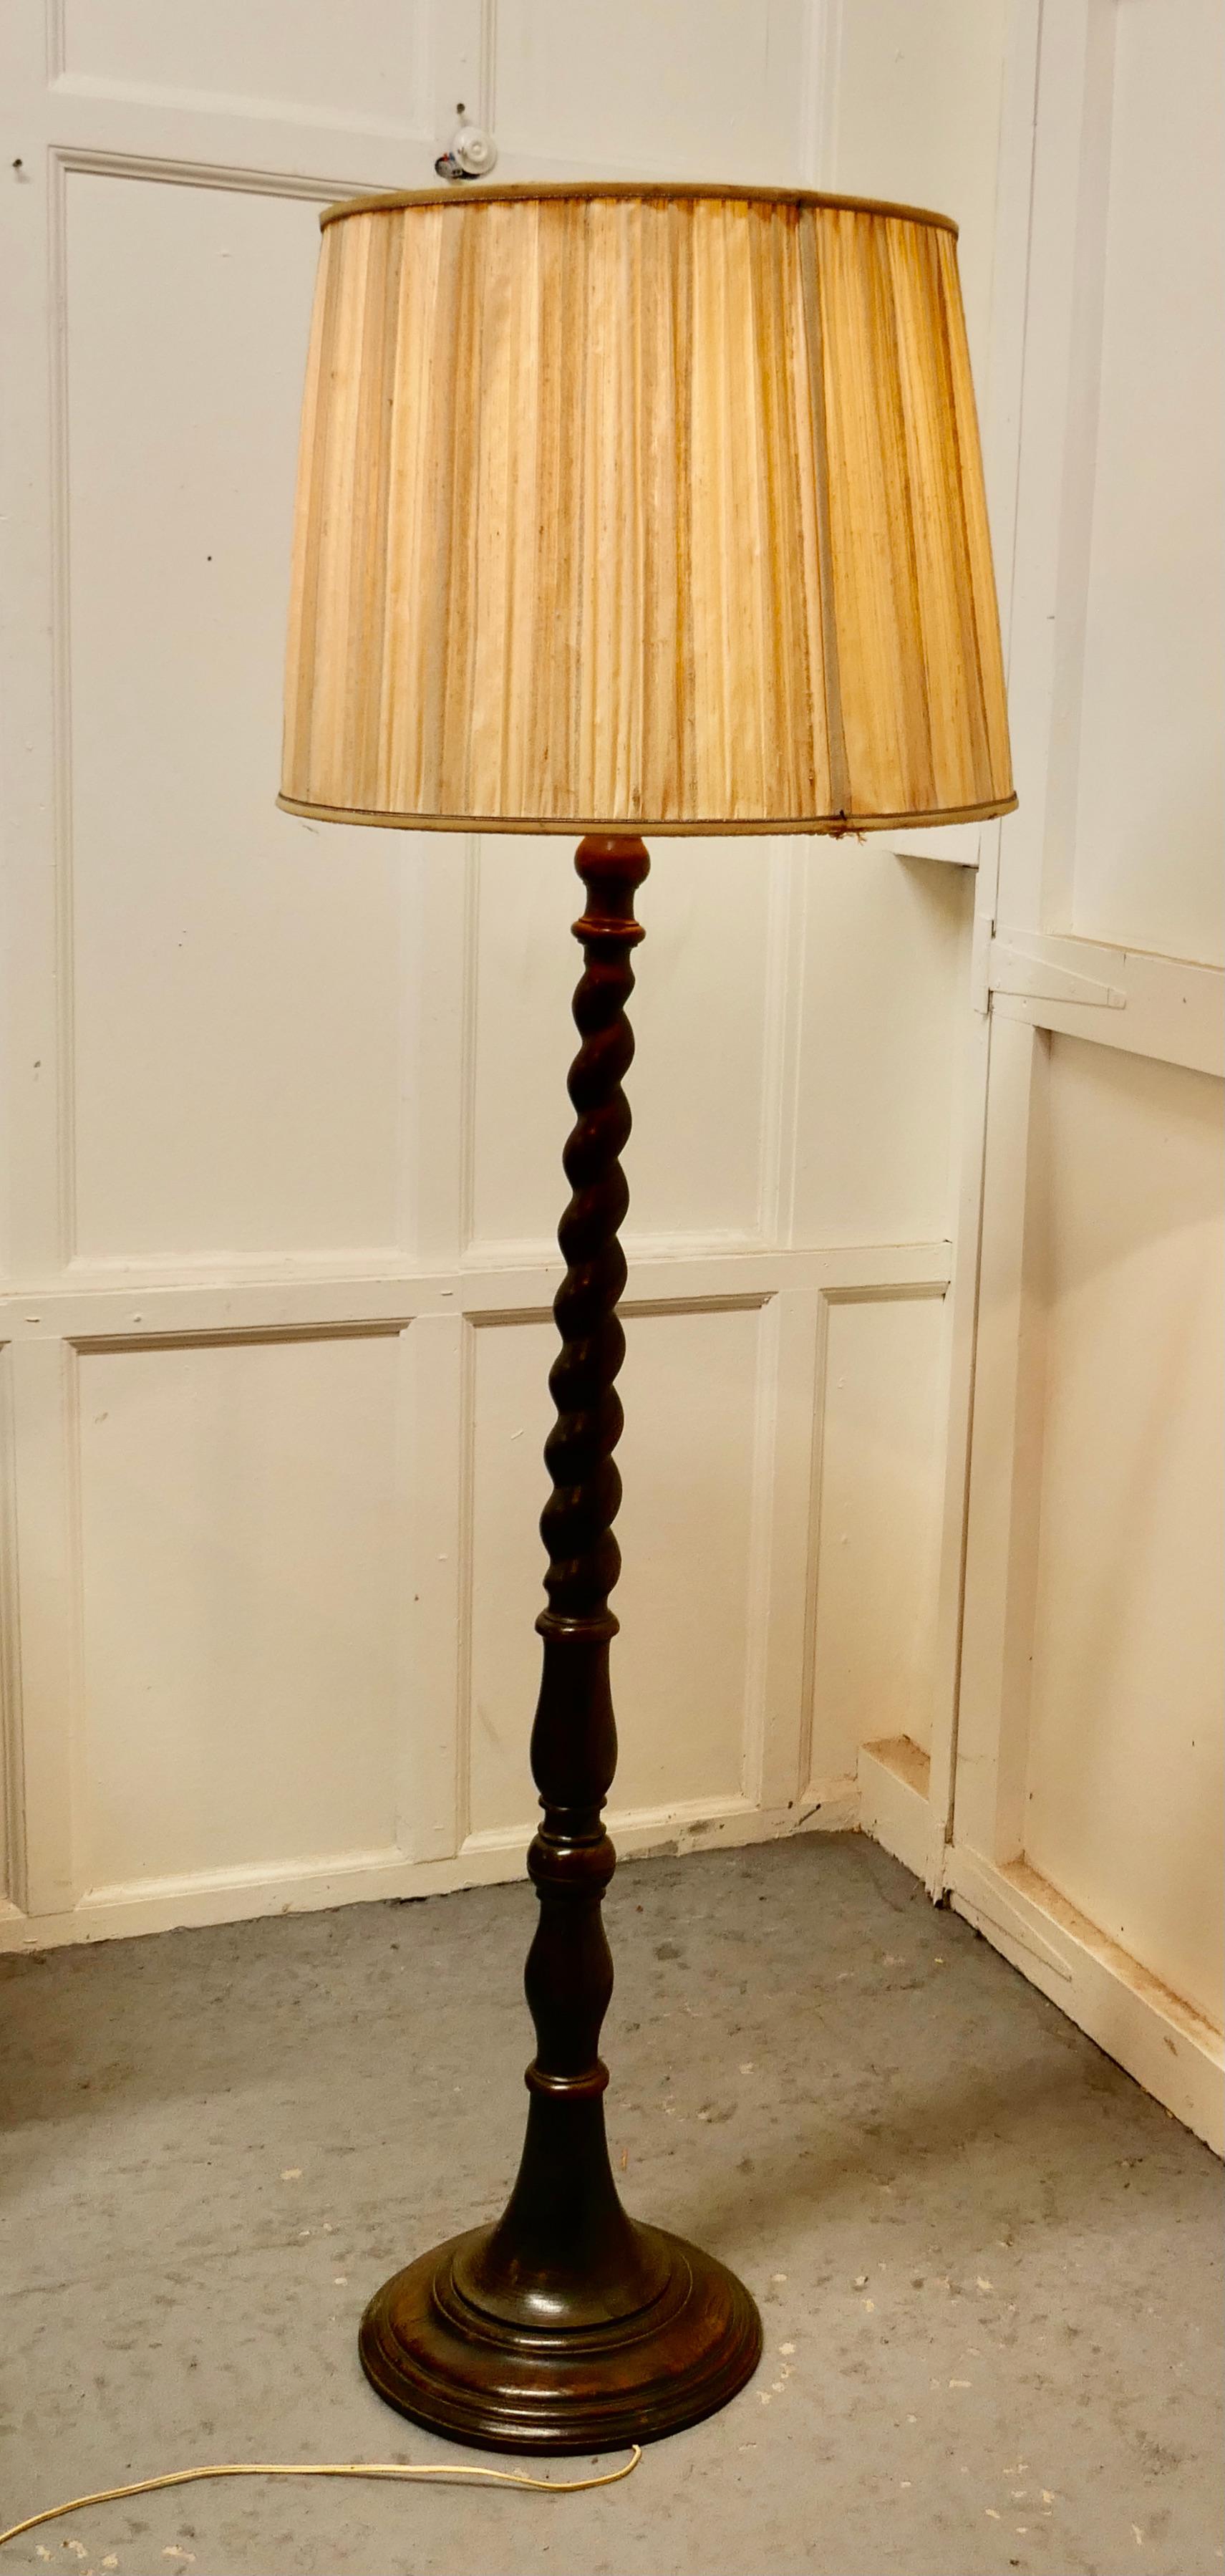 Barley twist floor standing standard oak lamp

 A skilfully turned piece, this lamp stands on a turned wooden base, it is in good condition, the wiring seems to be new but should be checked over when installed
The lamp is 67” high and the base is